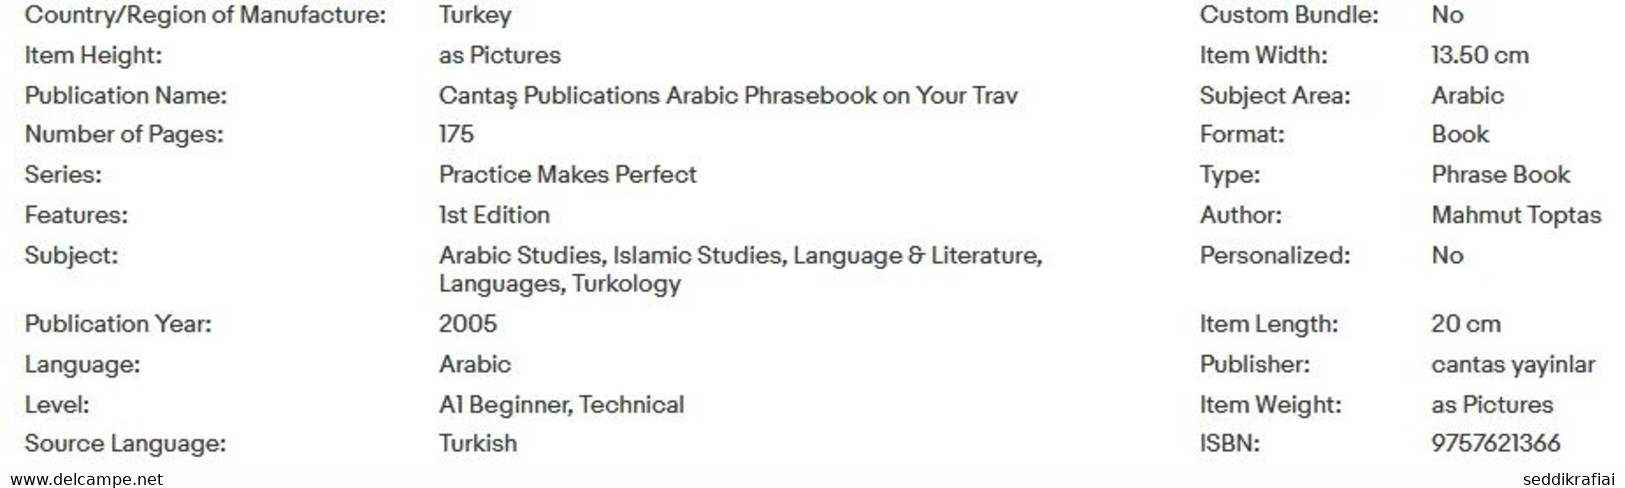 Cantaş Publications Arabic Phrasebook on Your Travel Learn Turkish in Arabic